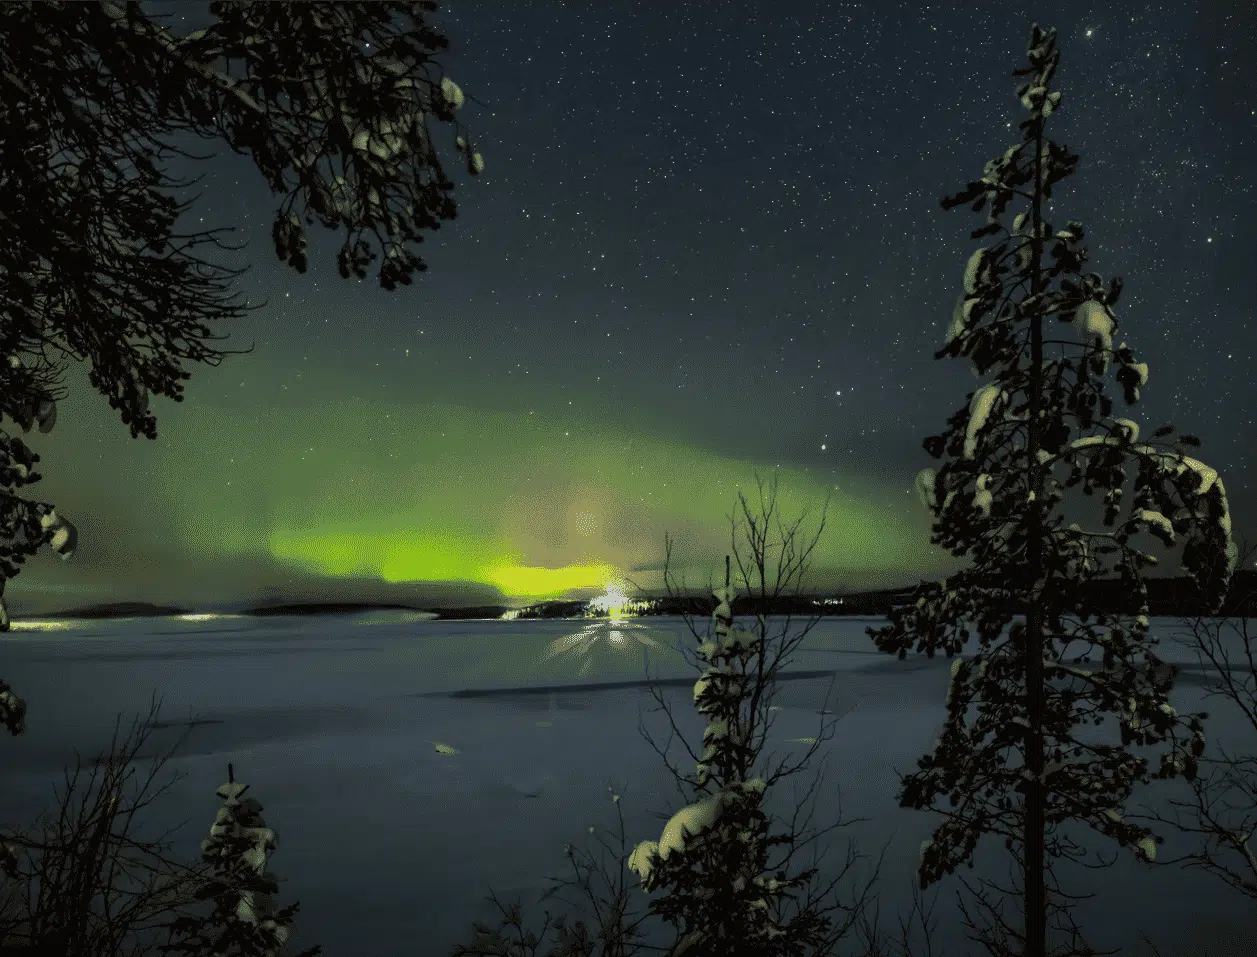 Discover the Northern Lights in Sweden with Explora Project!